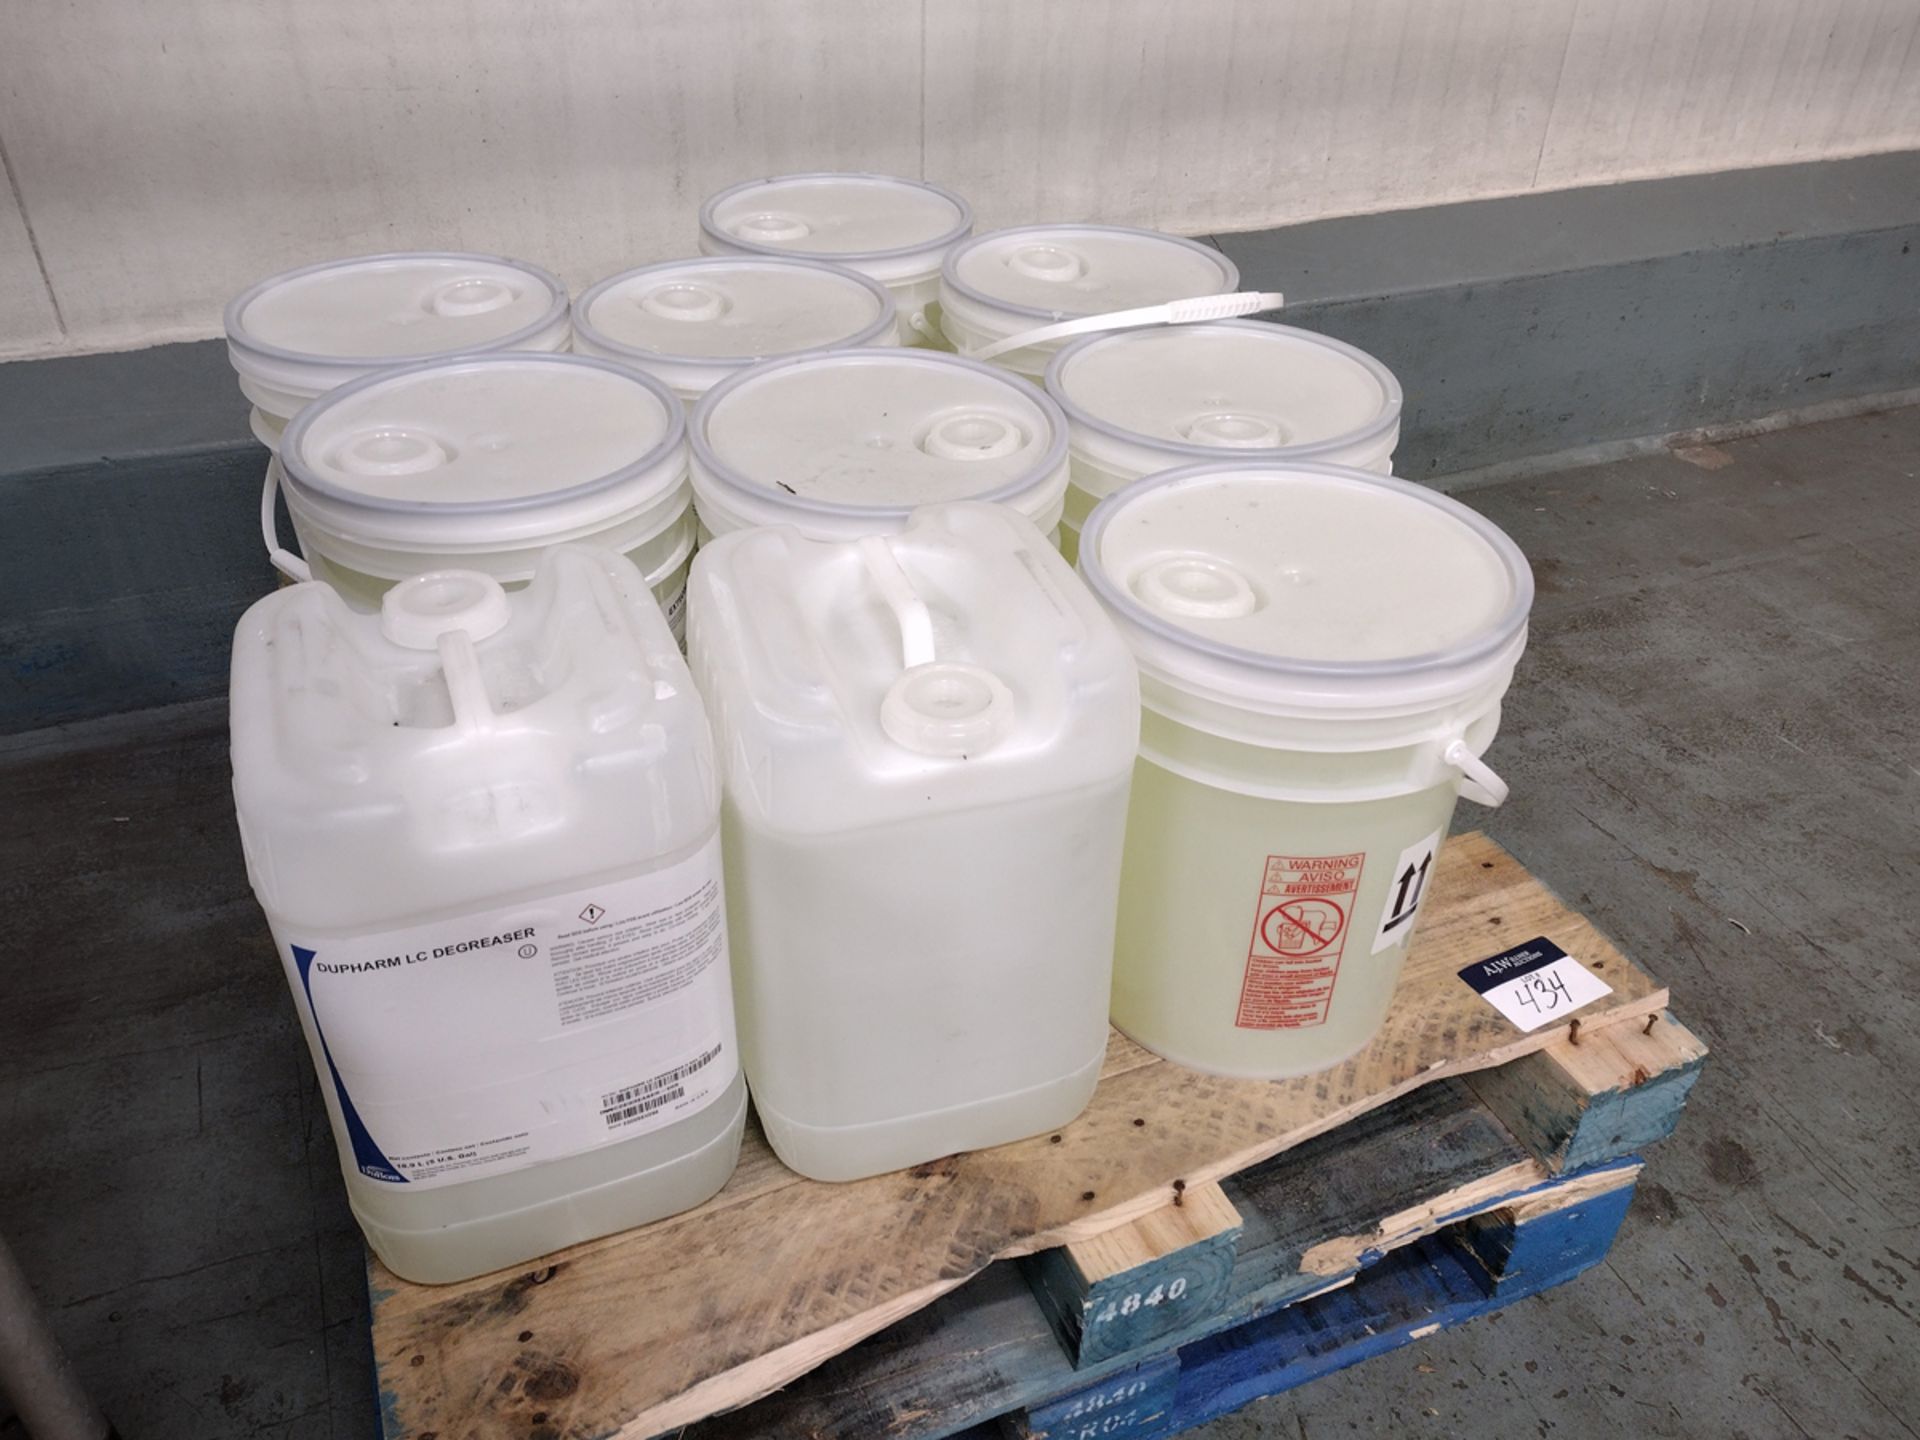 {Each} 5-Gallon Dupharm LC Industrial Degreaser - Image 2 of 2